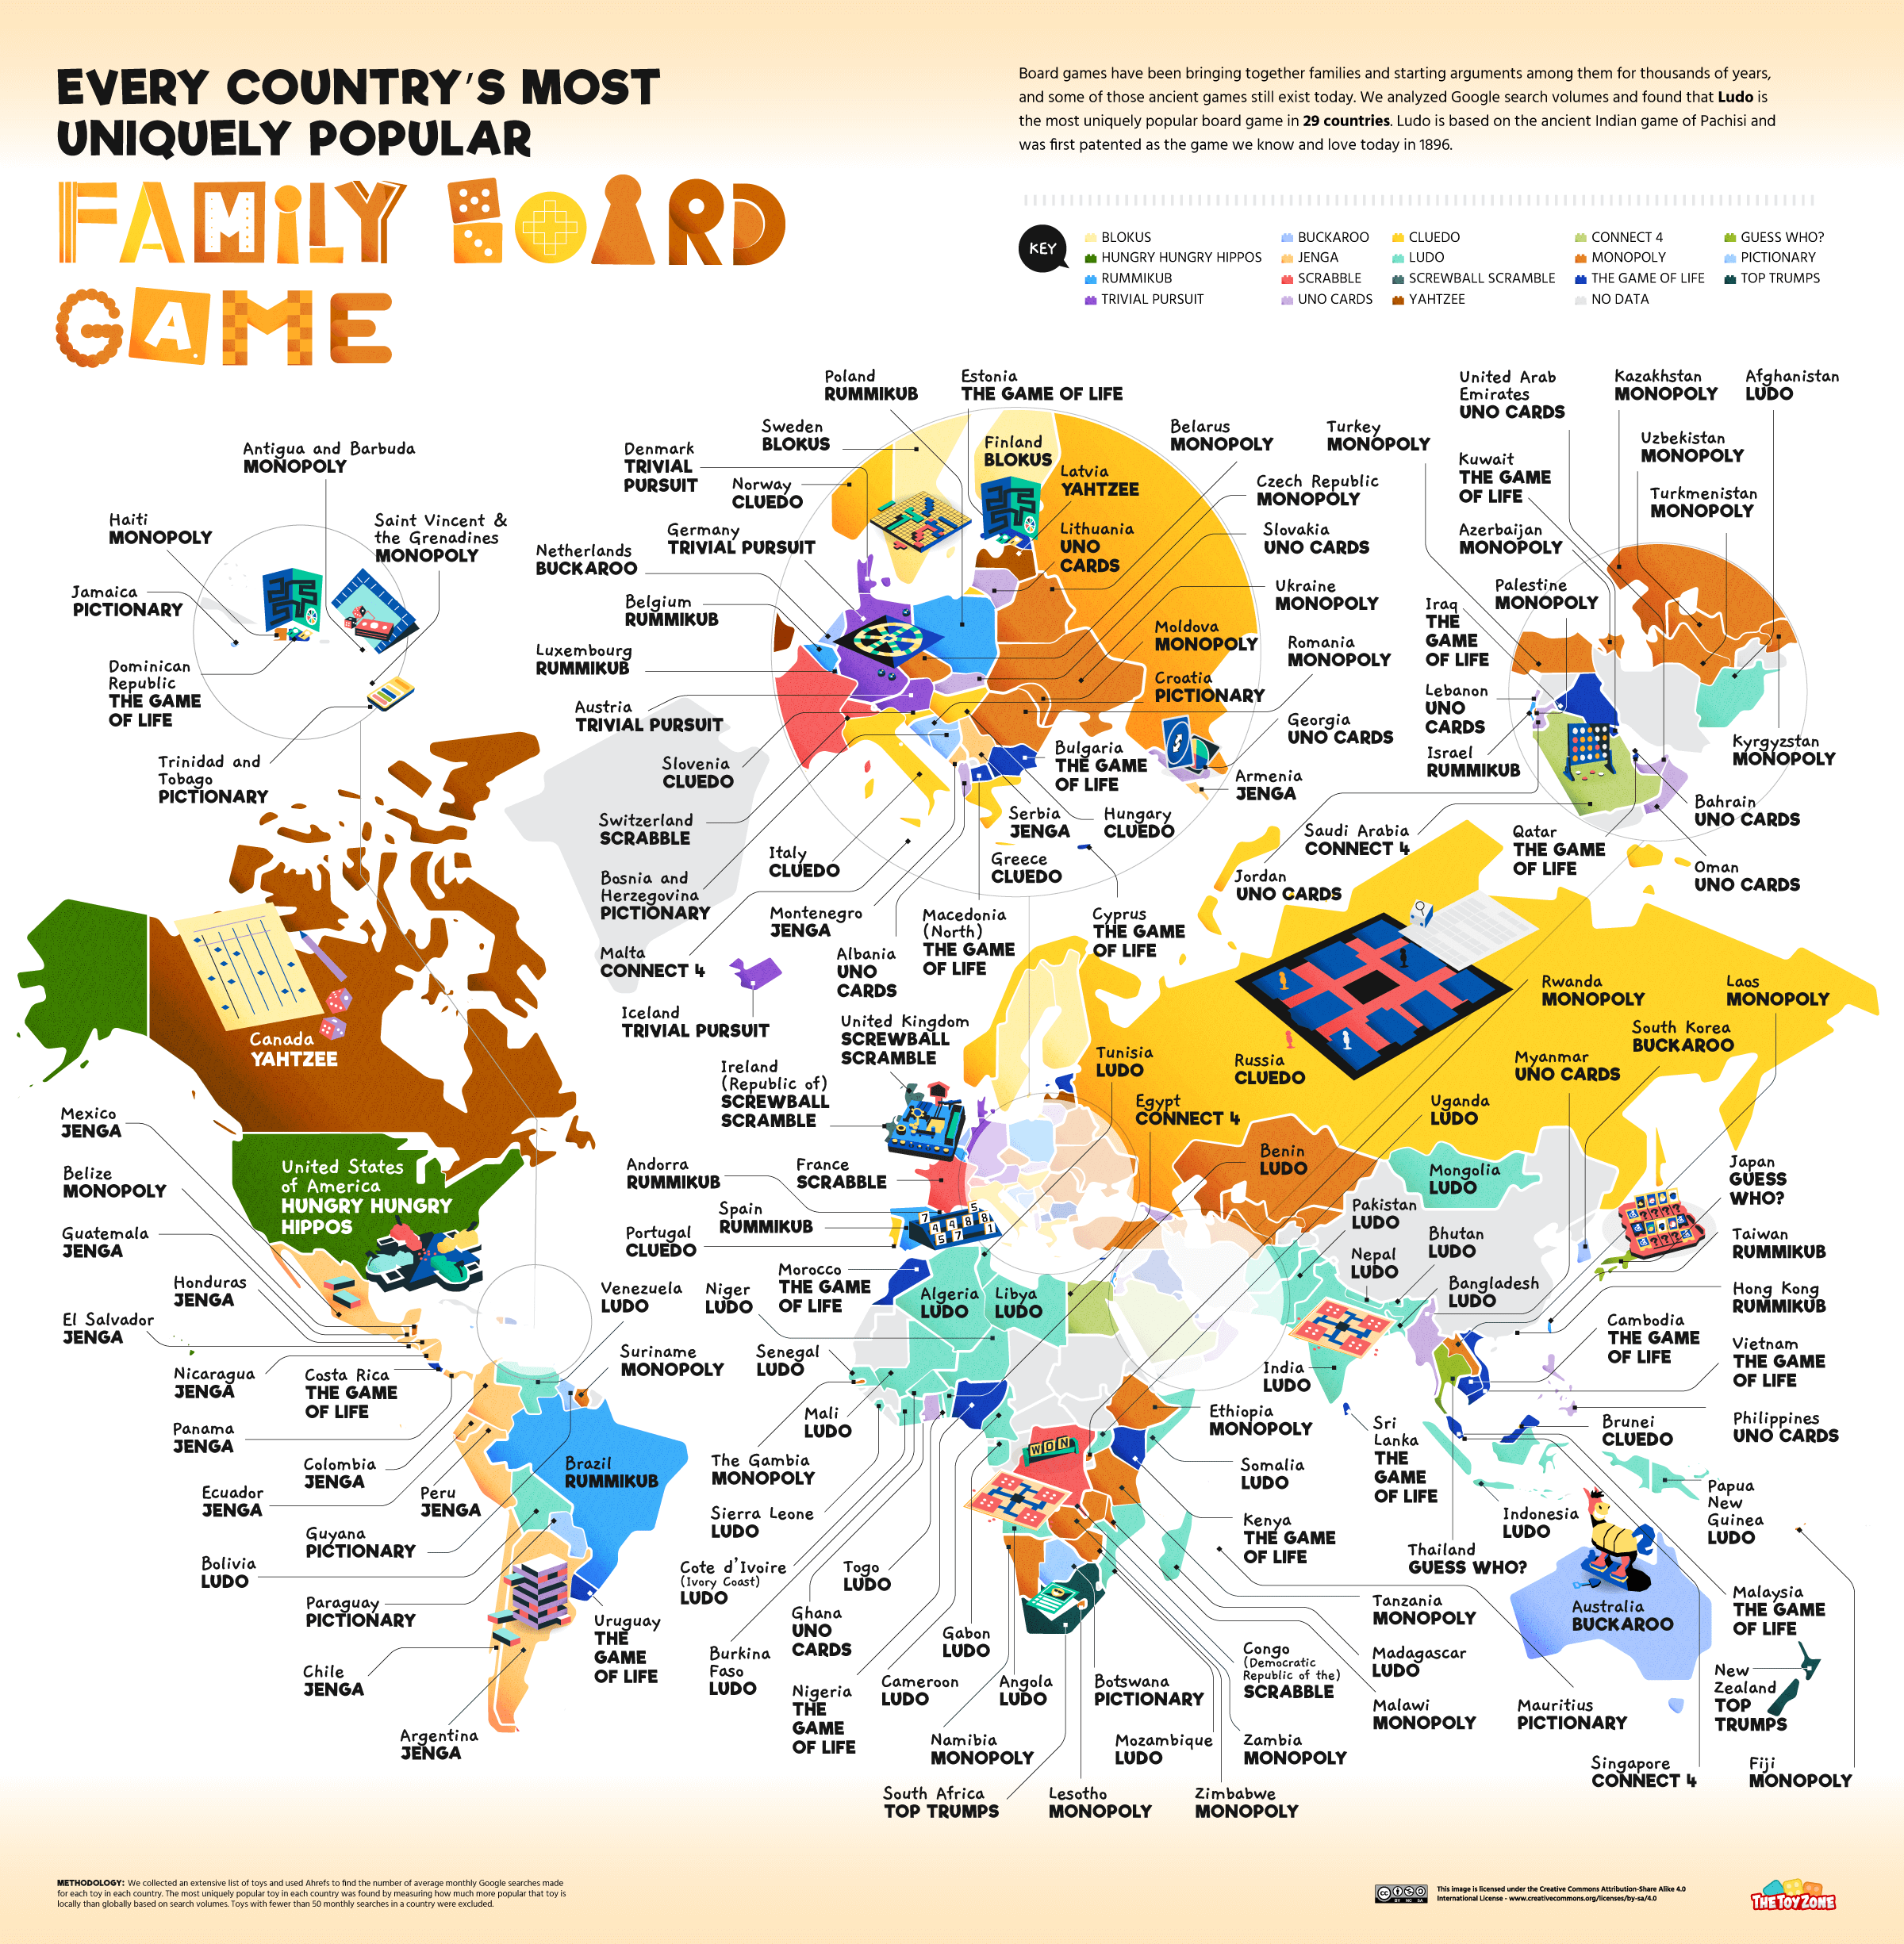 The most popular board games by country